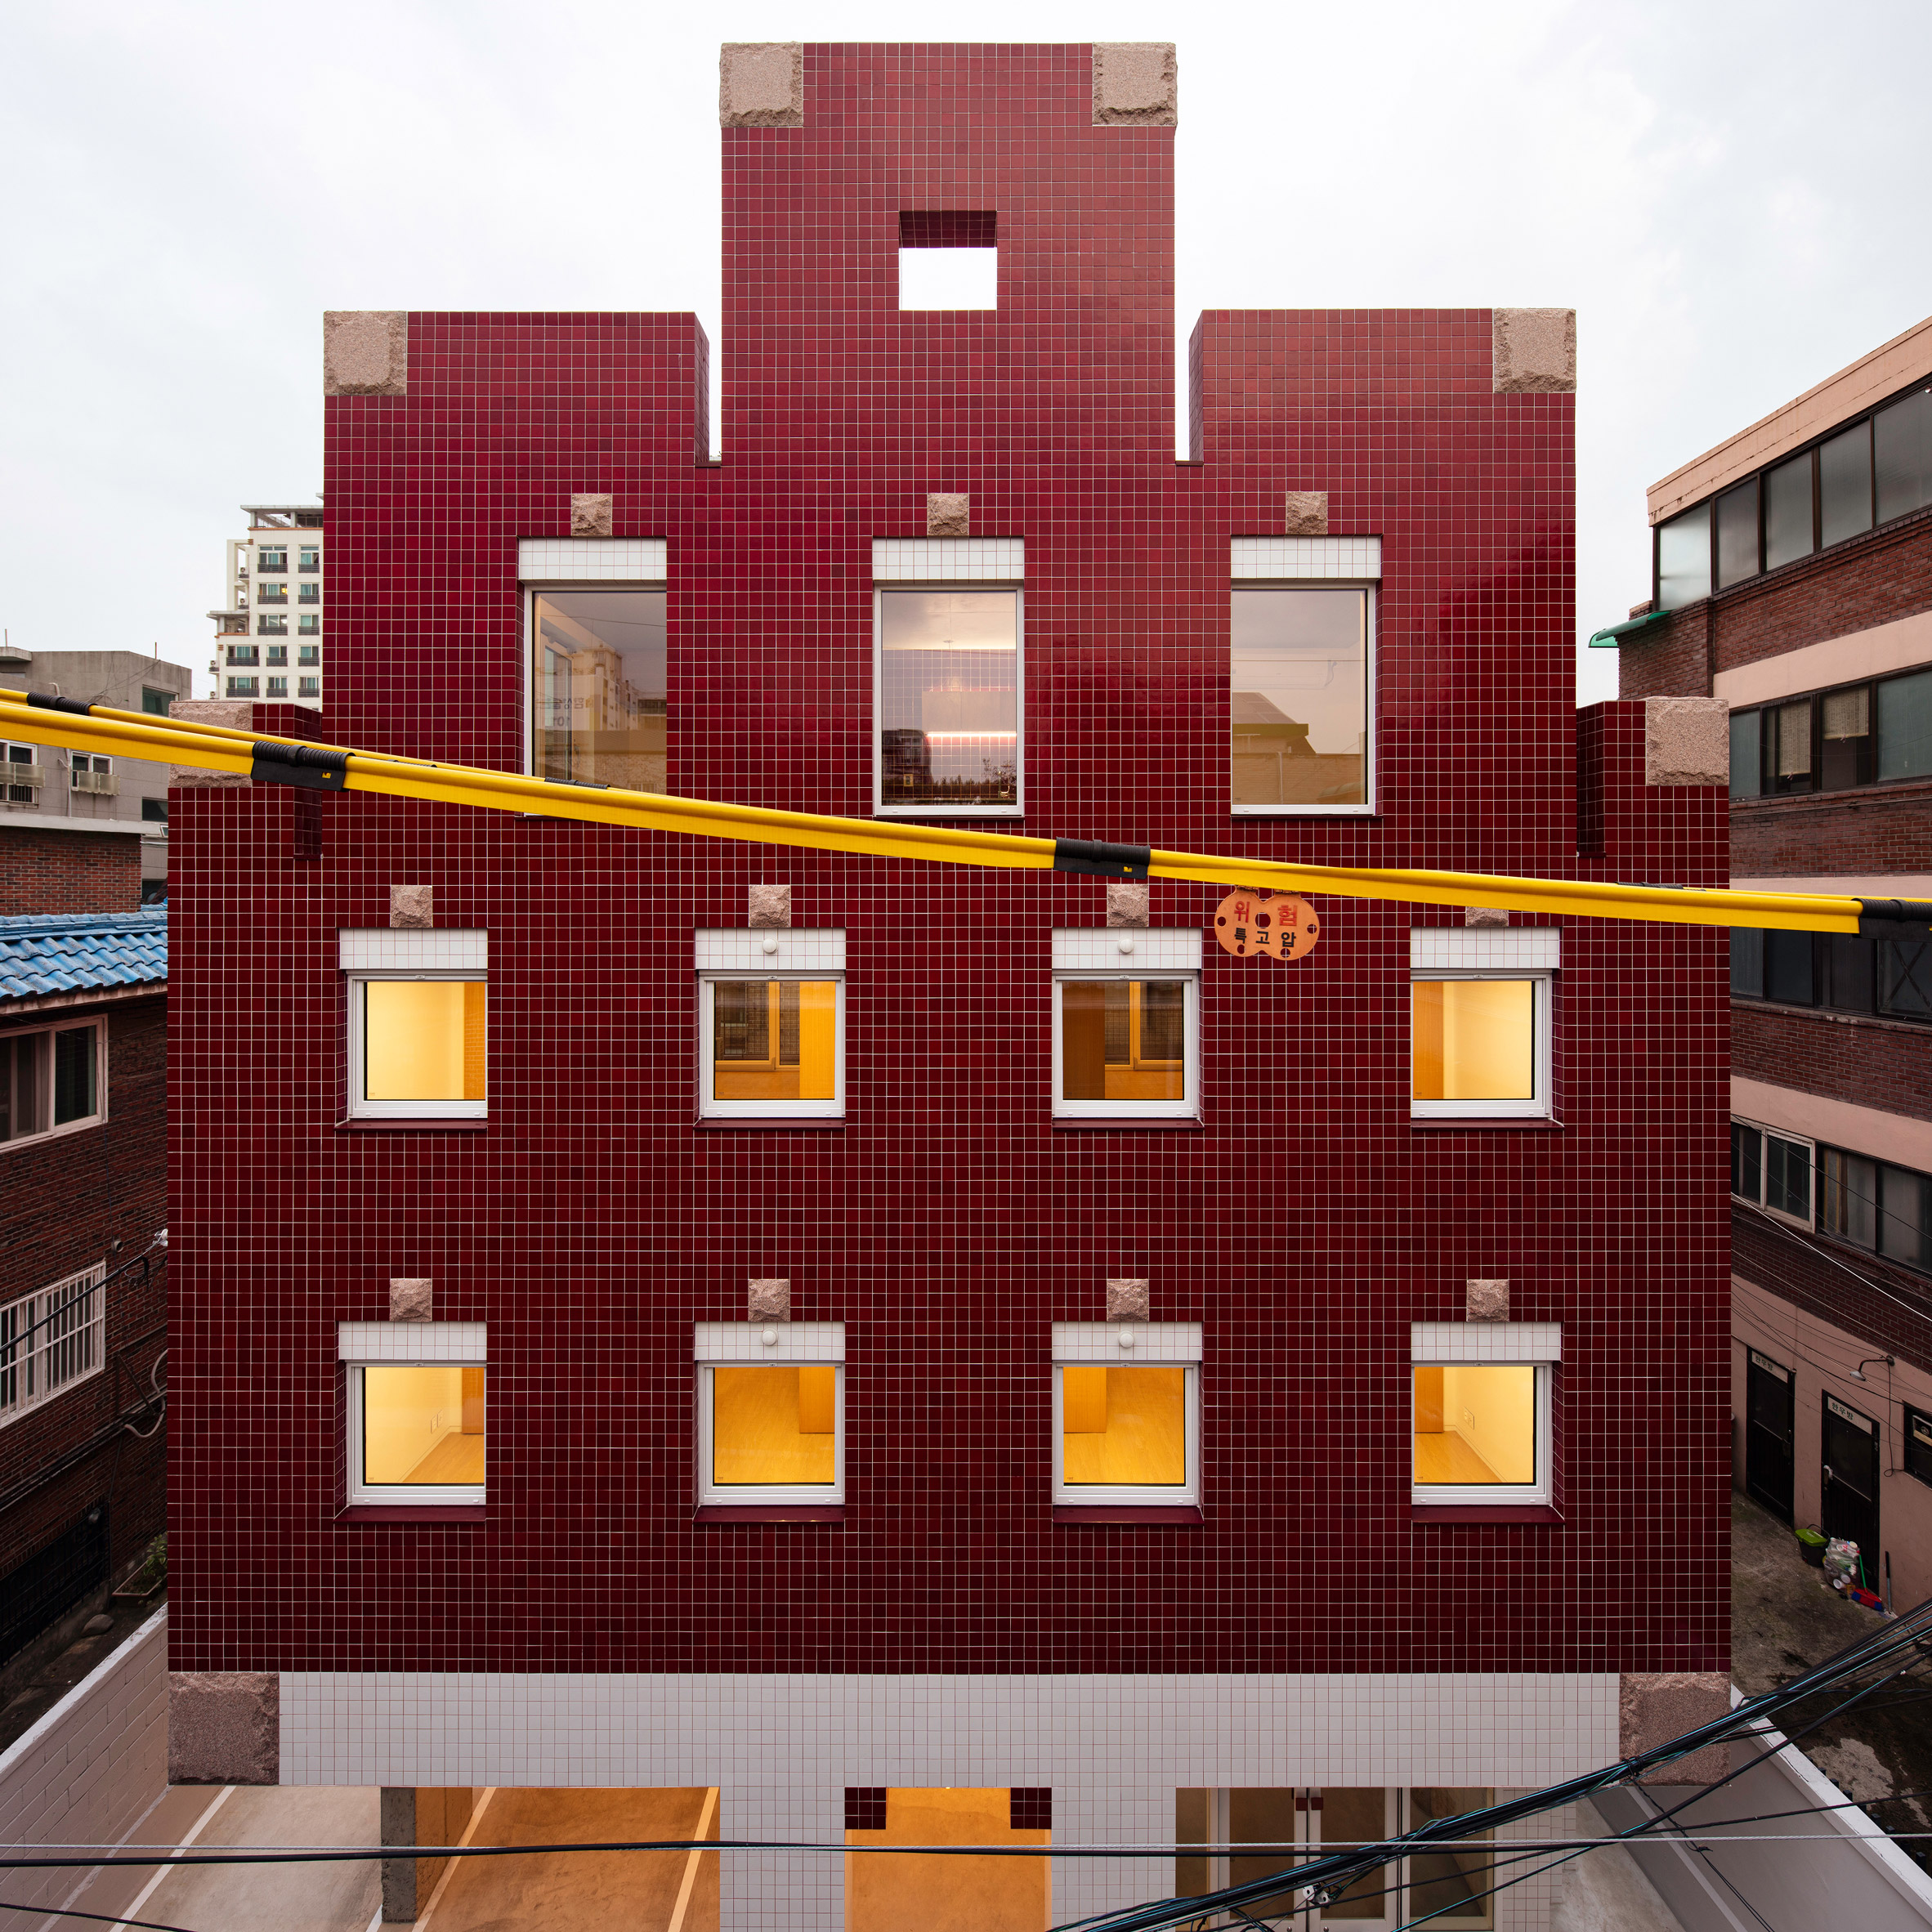 Aoa Architects Clads Minecraft Themed Apartments With Pixel Like Tiles